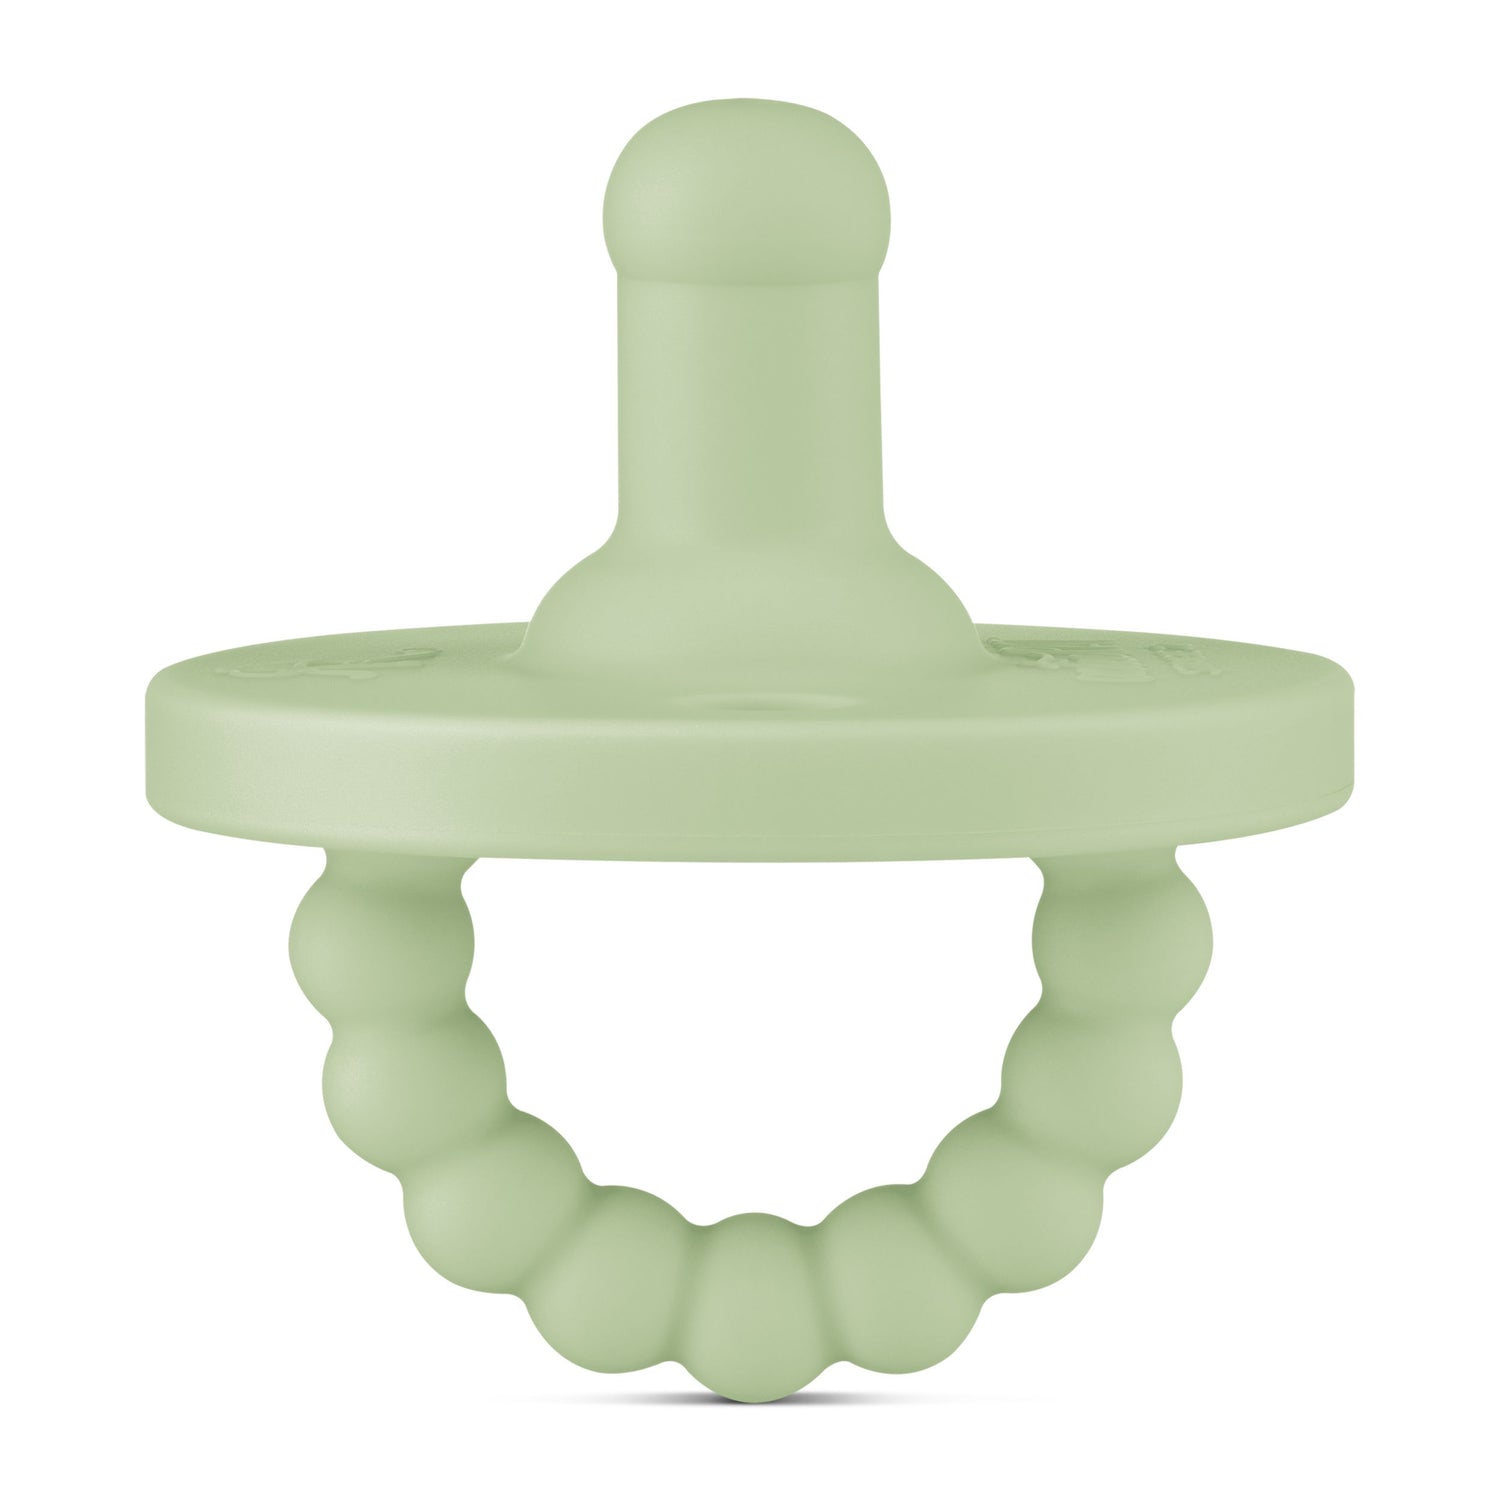 Cutie PAT Round (0-24m) Pacifier + Teether